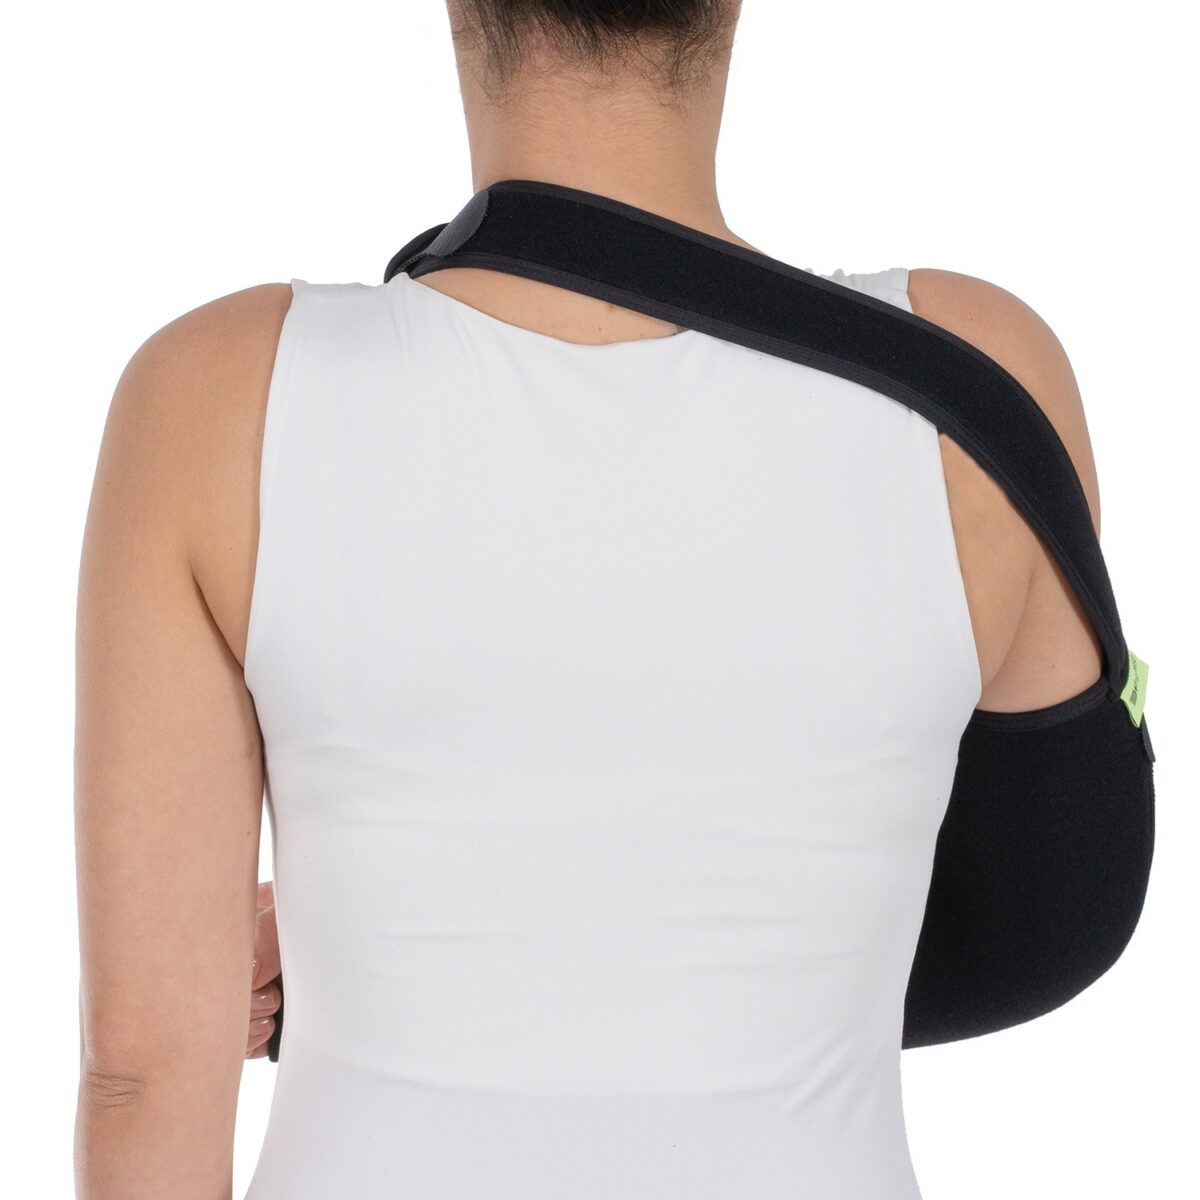 wingmed orthopedic equipments W211 arm sling with additionnal belt lux 5